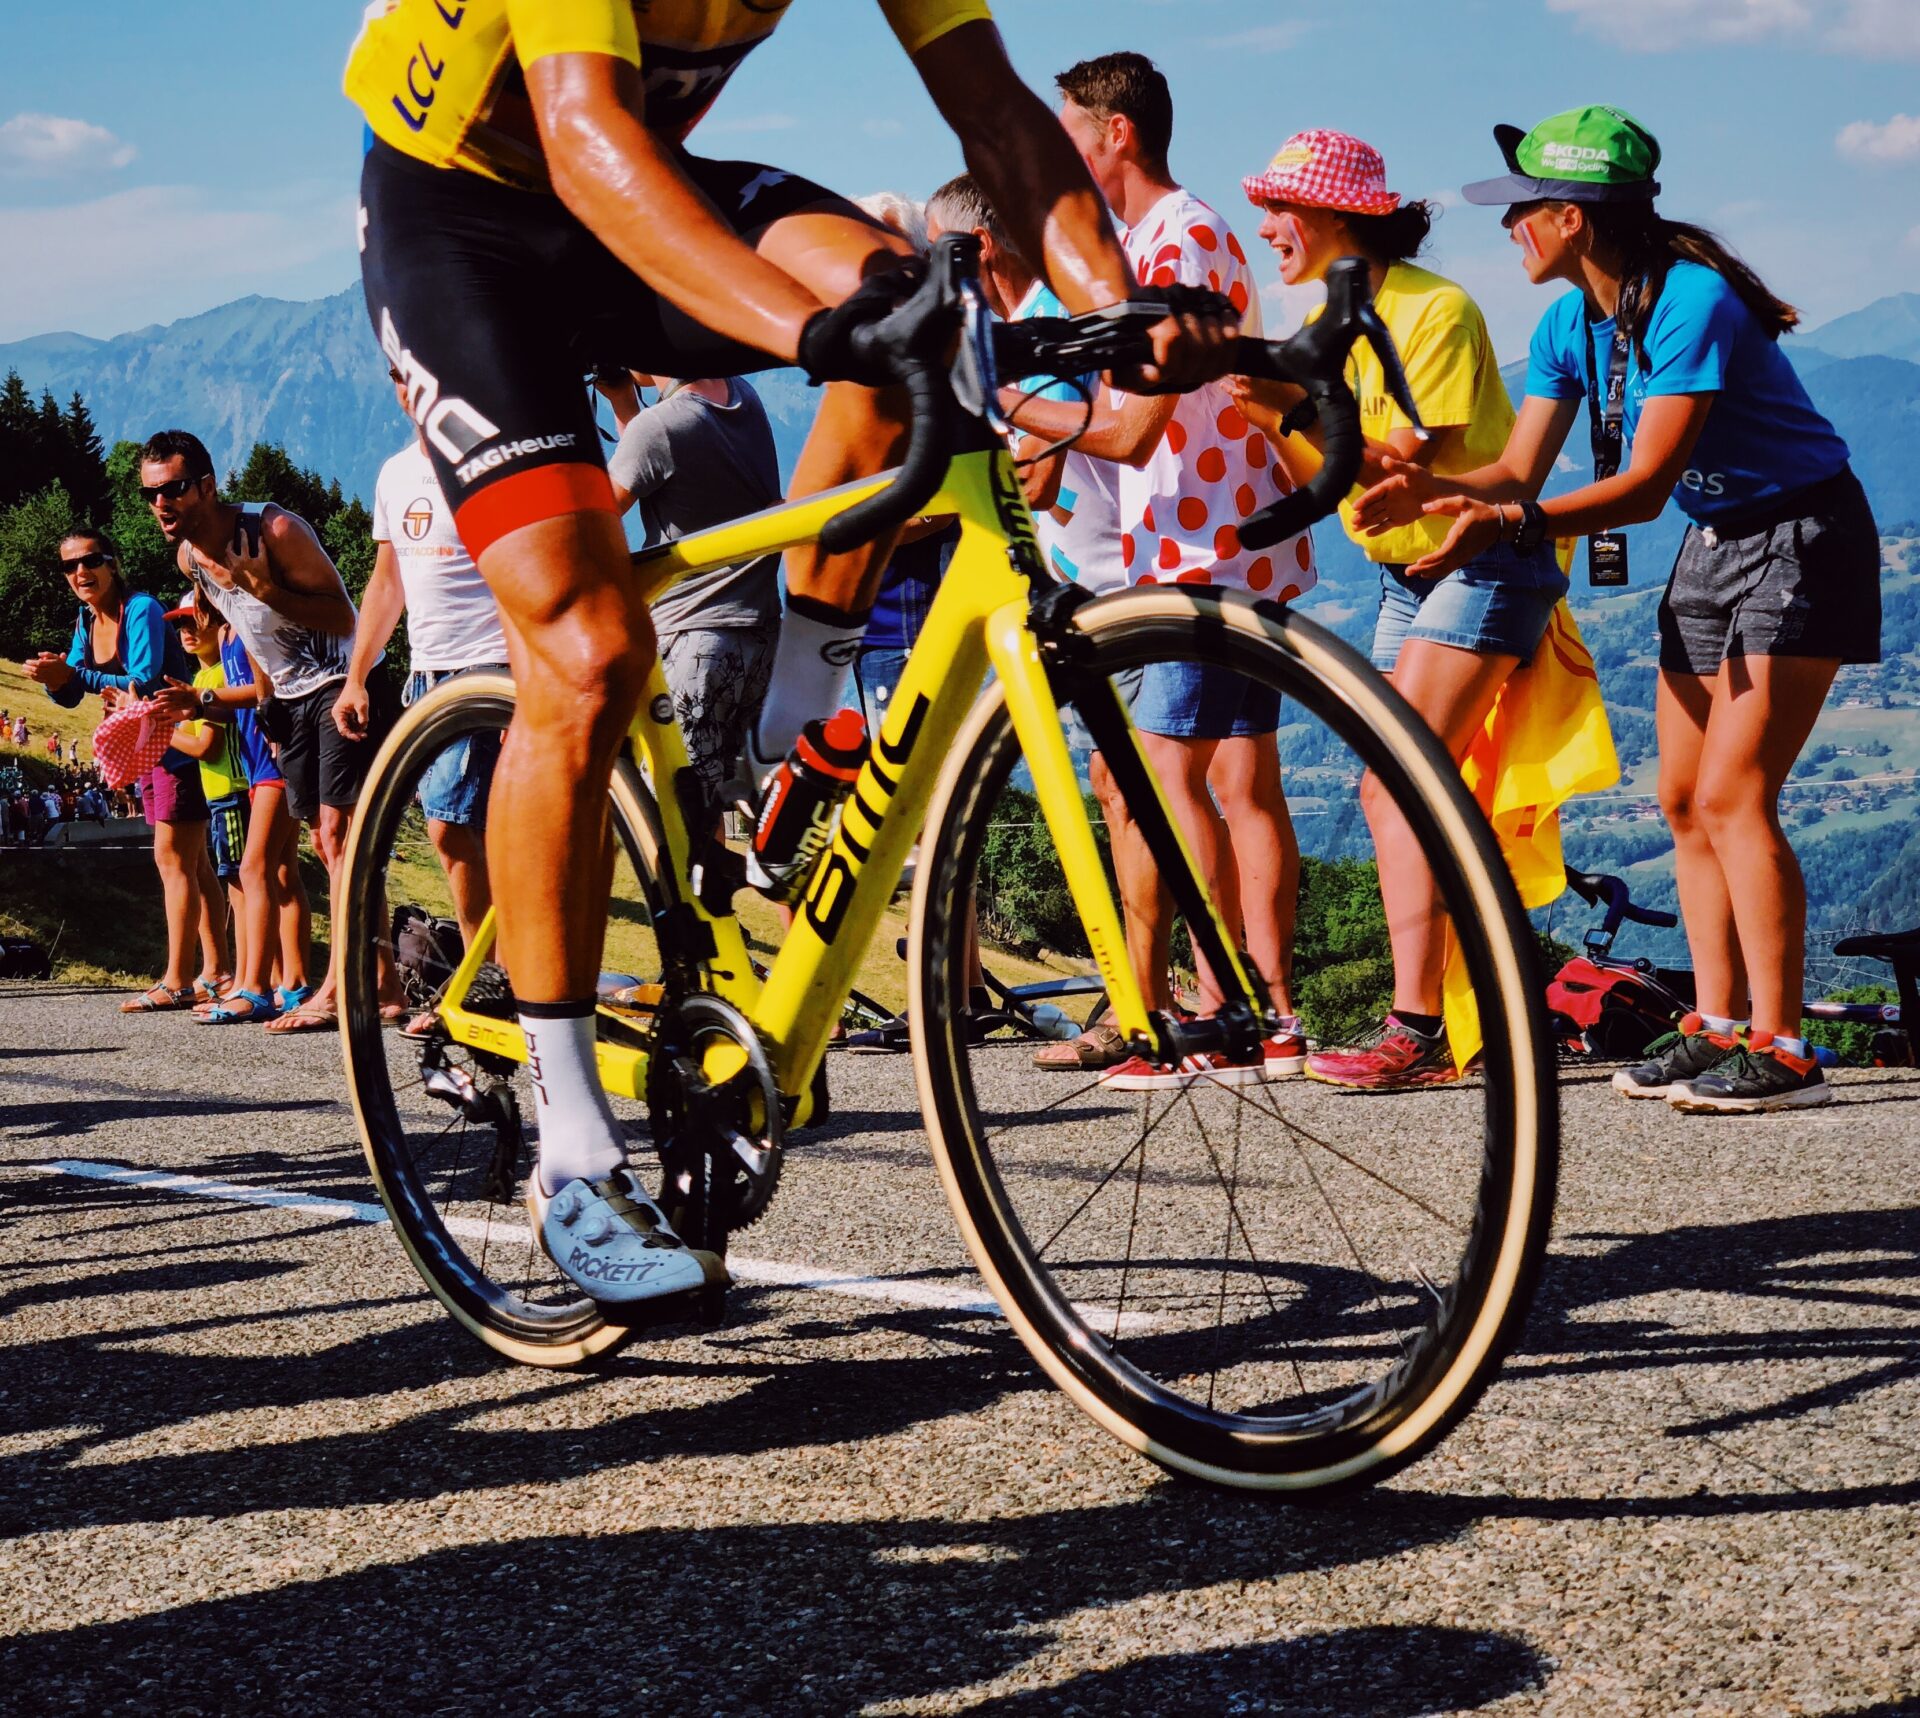 The yellow jersey rider of the Tour de France rides on a yellow BMC Road Bike, while pushing the pedals hard as a fast cyclist.